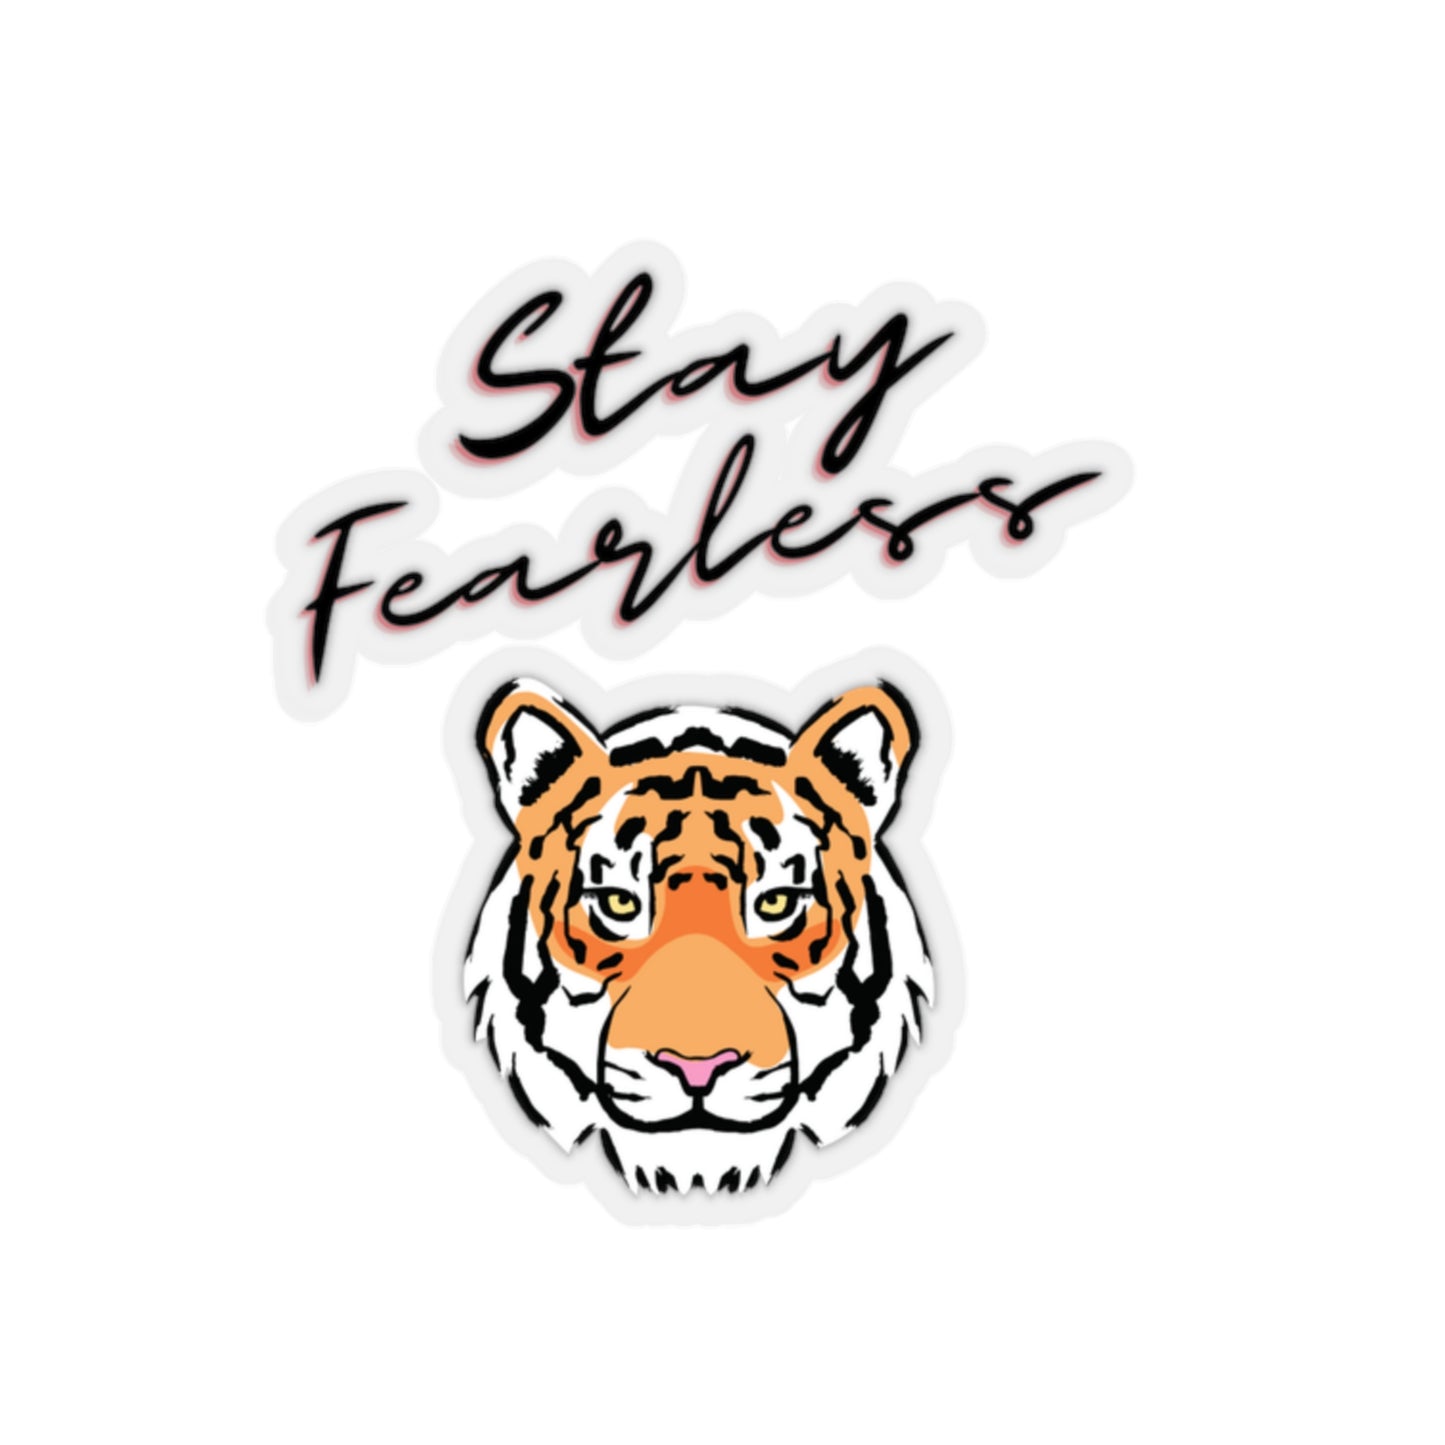 Stay Fearless Kiss-Cut Stickers Cat Lady Attitude Stickers Love Tigers Tiger Love Love Cats Cat Lover Cute Tiger Fun Decal Cattitude Empower - The Good Life Vibe